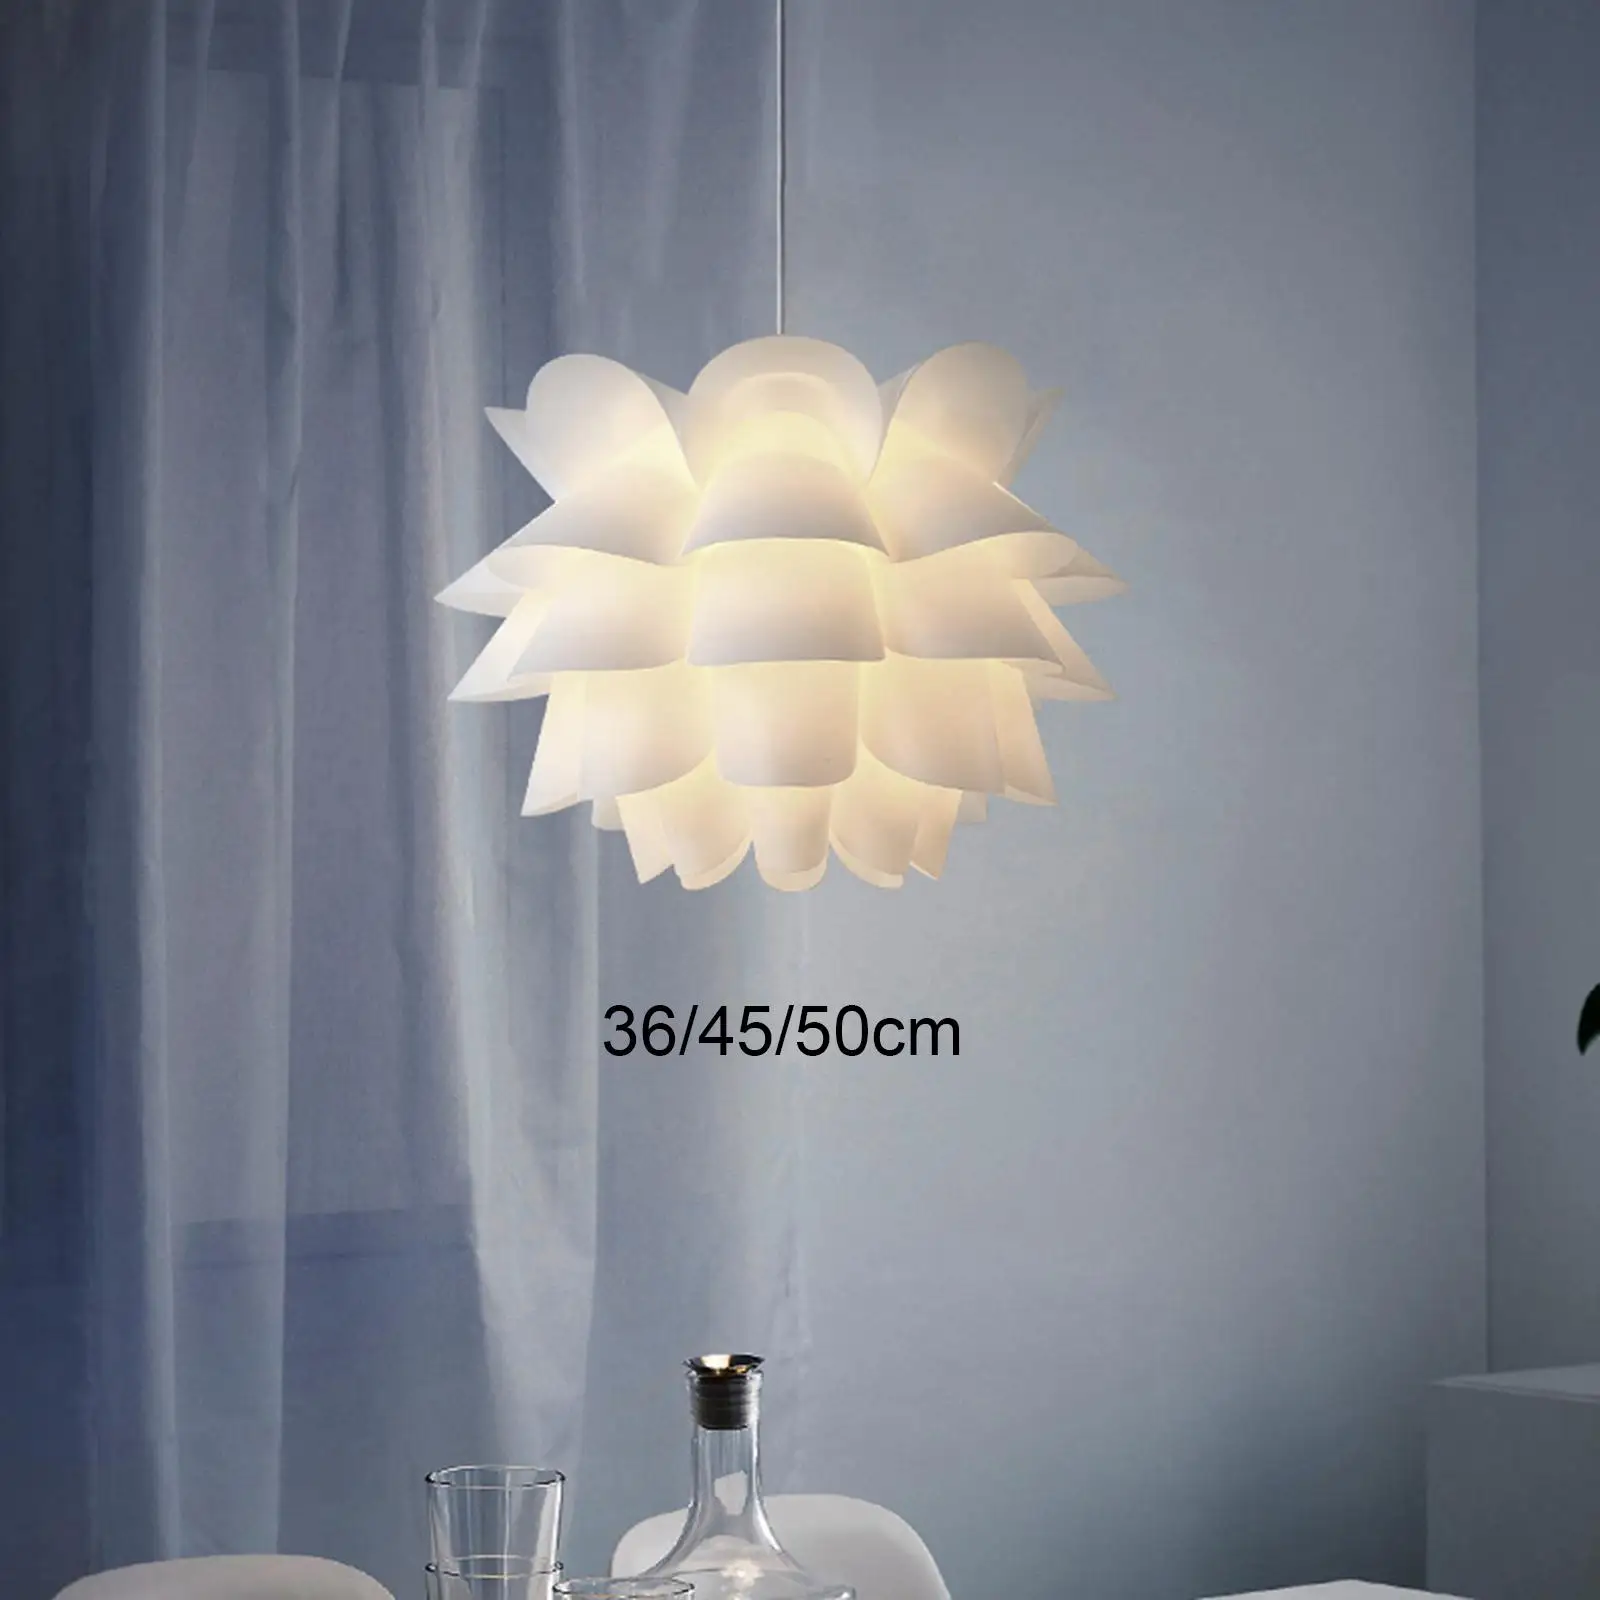 Lotus Flower Lamp Shade Puzzle Lampshade Elegant Modern Chandelier Ceiling Light Shade Lampshade for Hotel Home Cafe Decorative